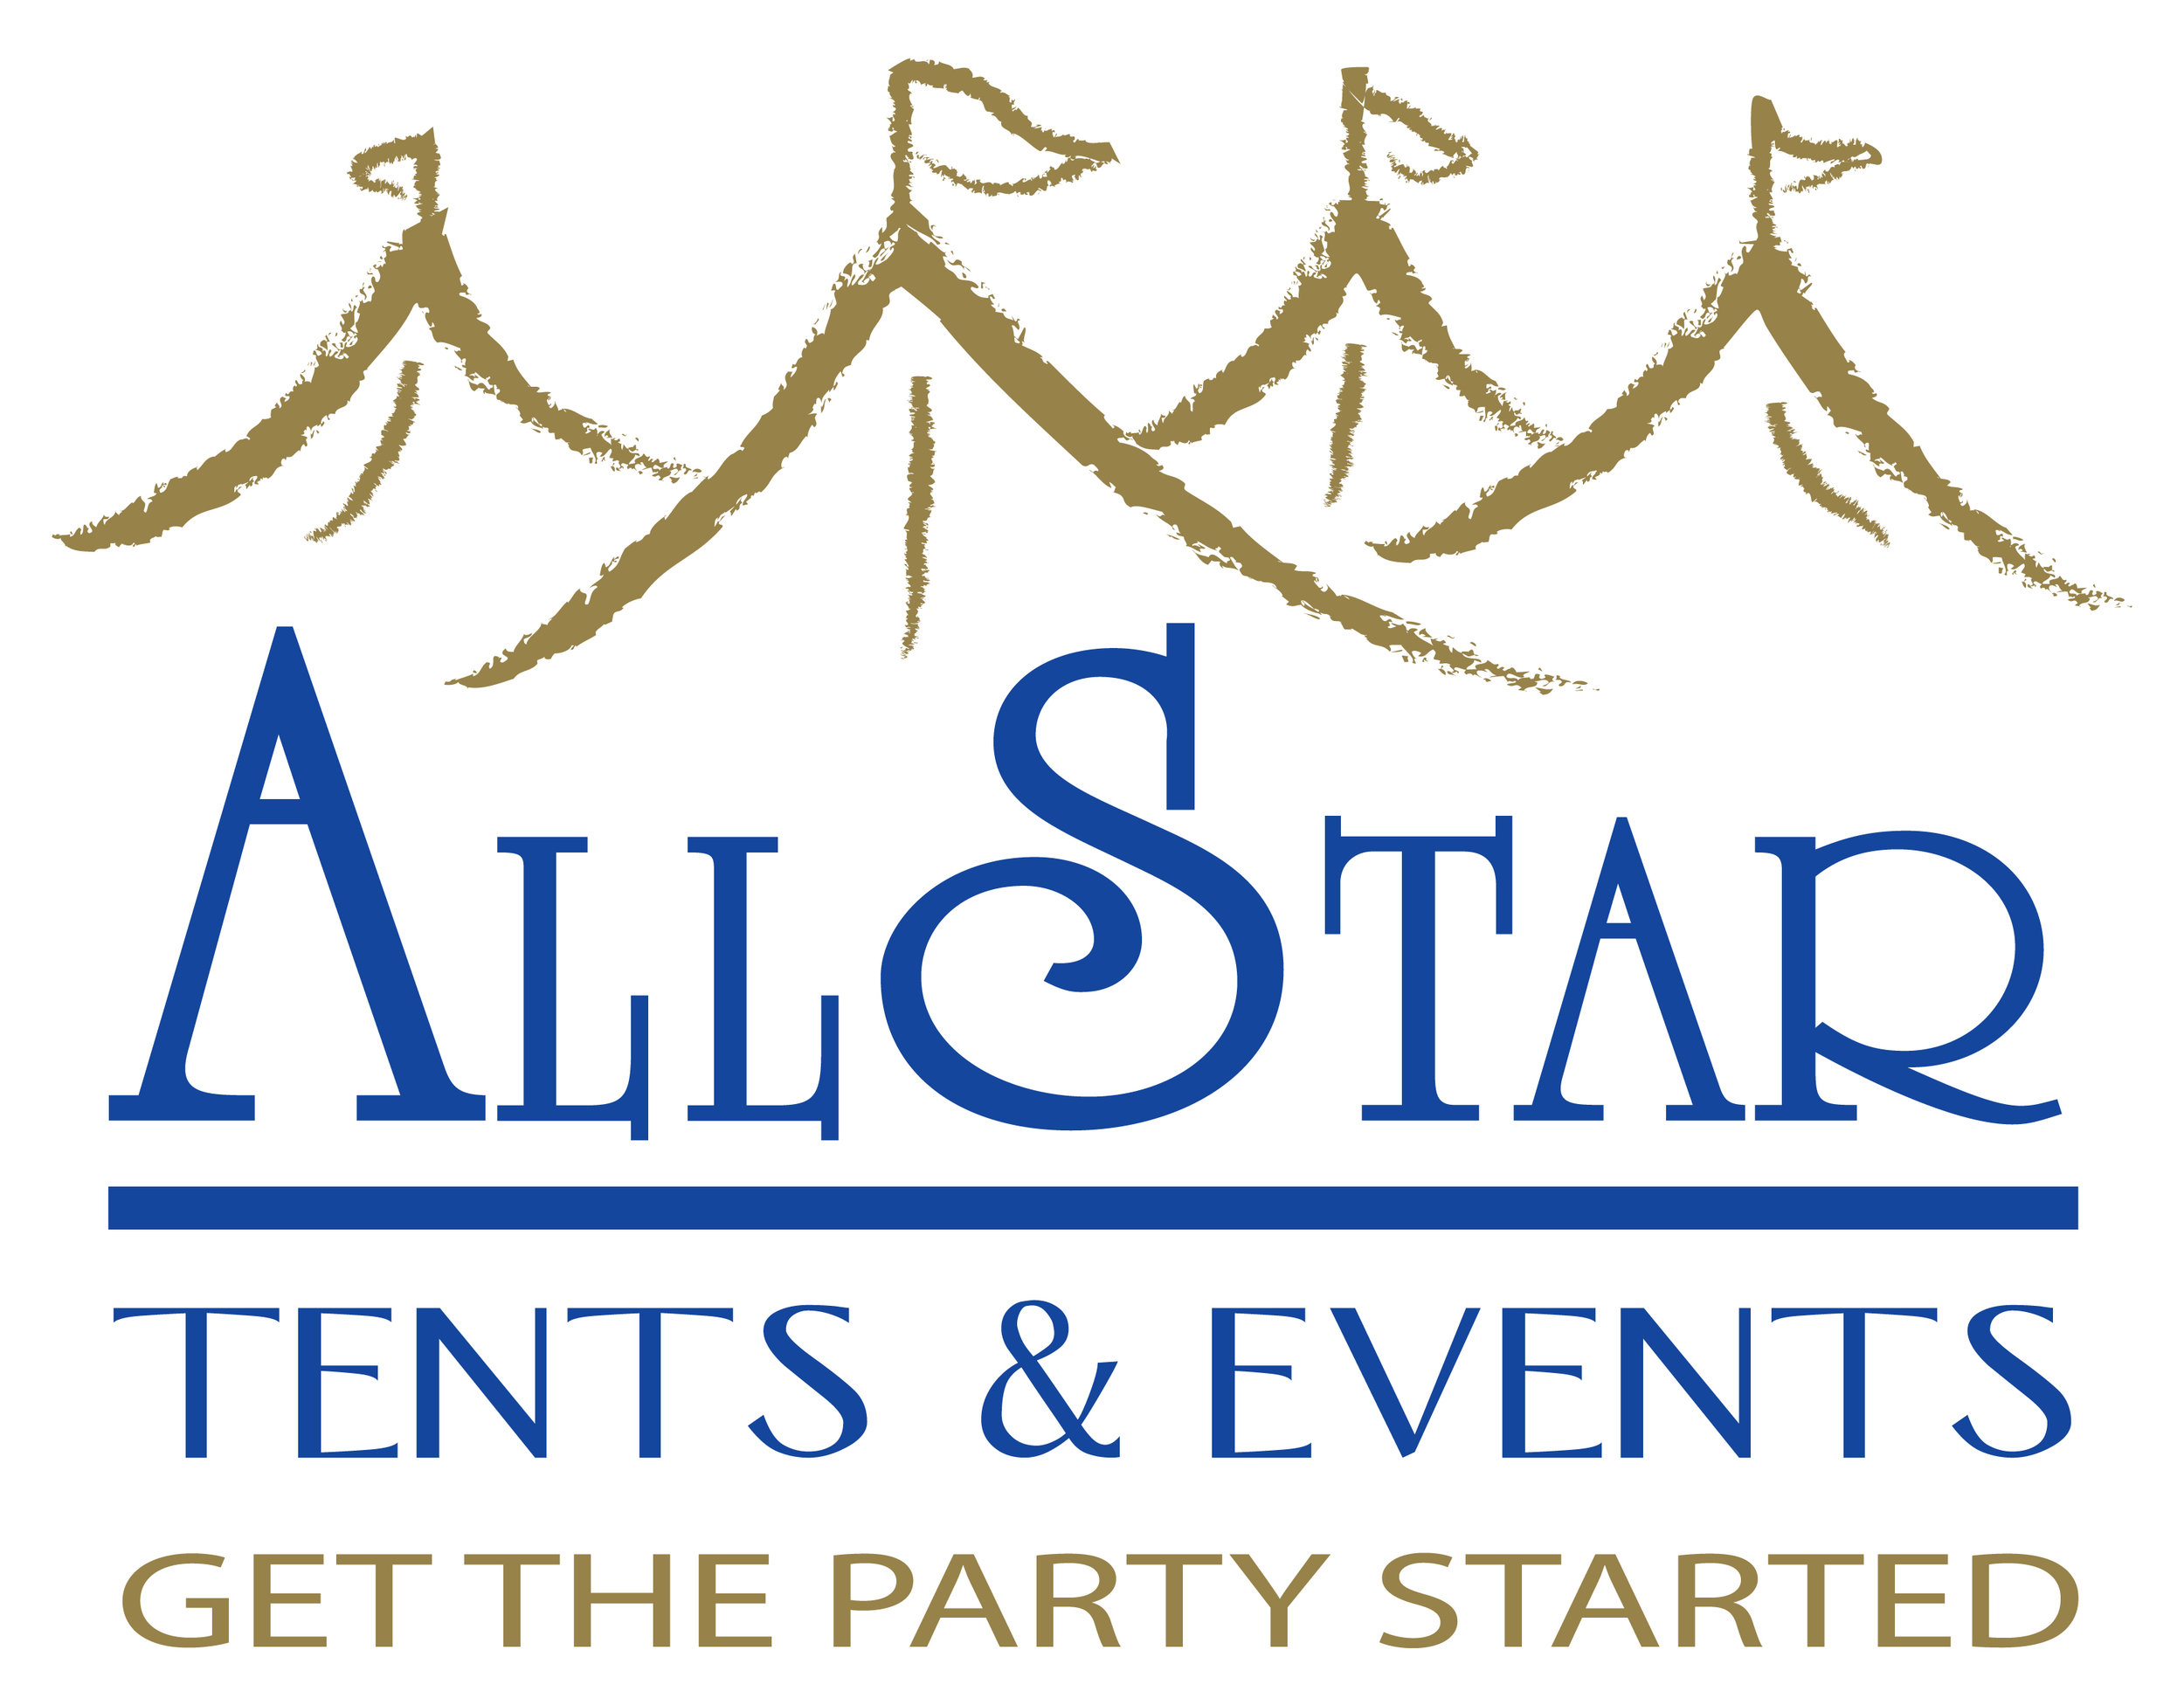 All Star Tents & Events_Logo_New_Final.jpg